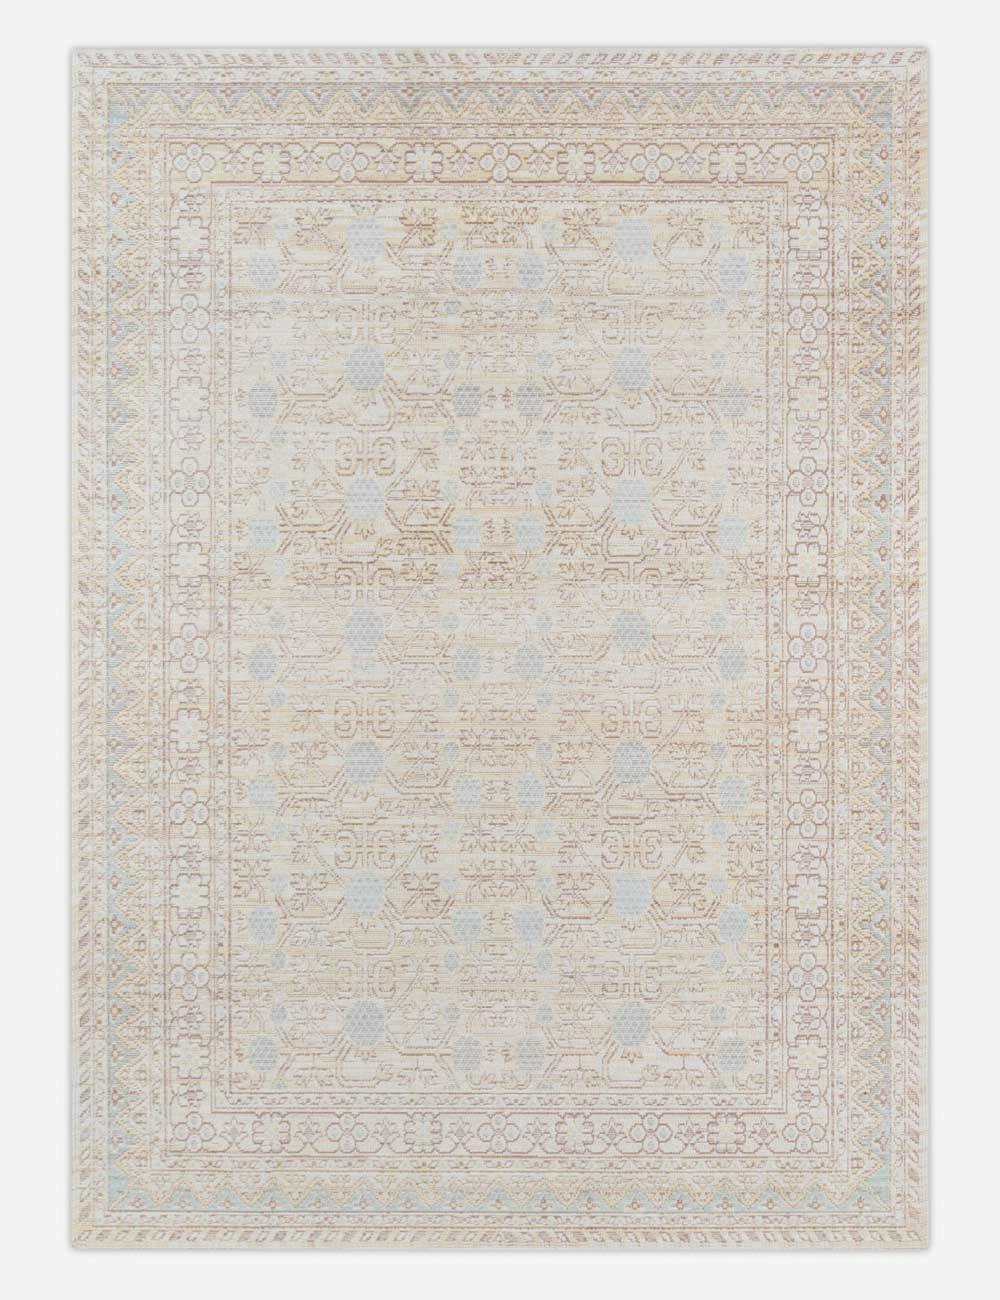 Isabella Floral Loomed Accent Rug in Soft Blue - 7'10" x 10'6"